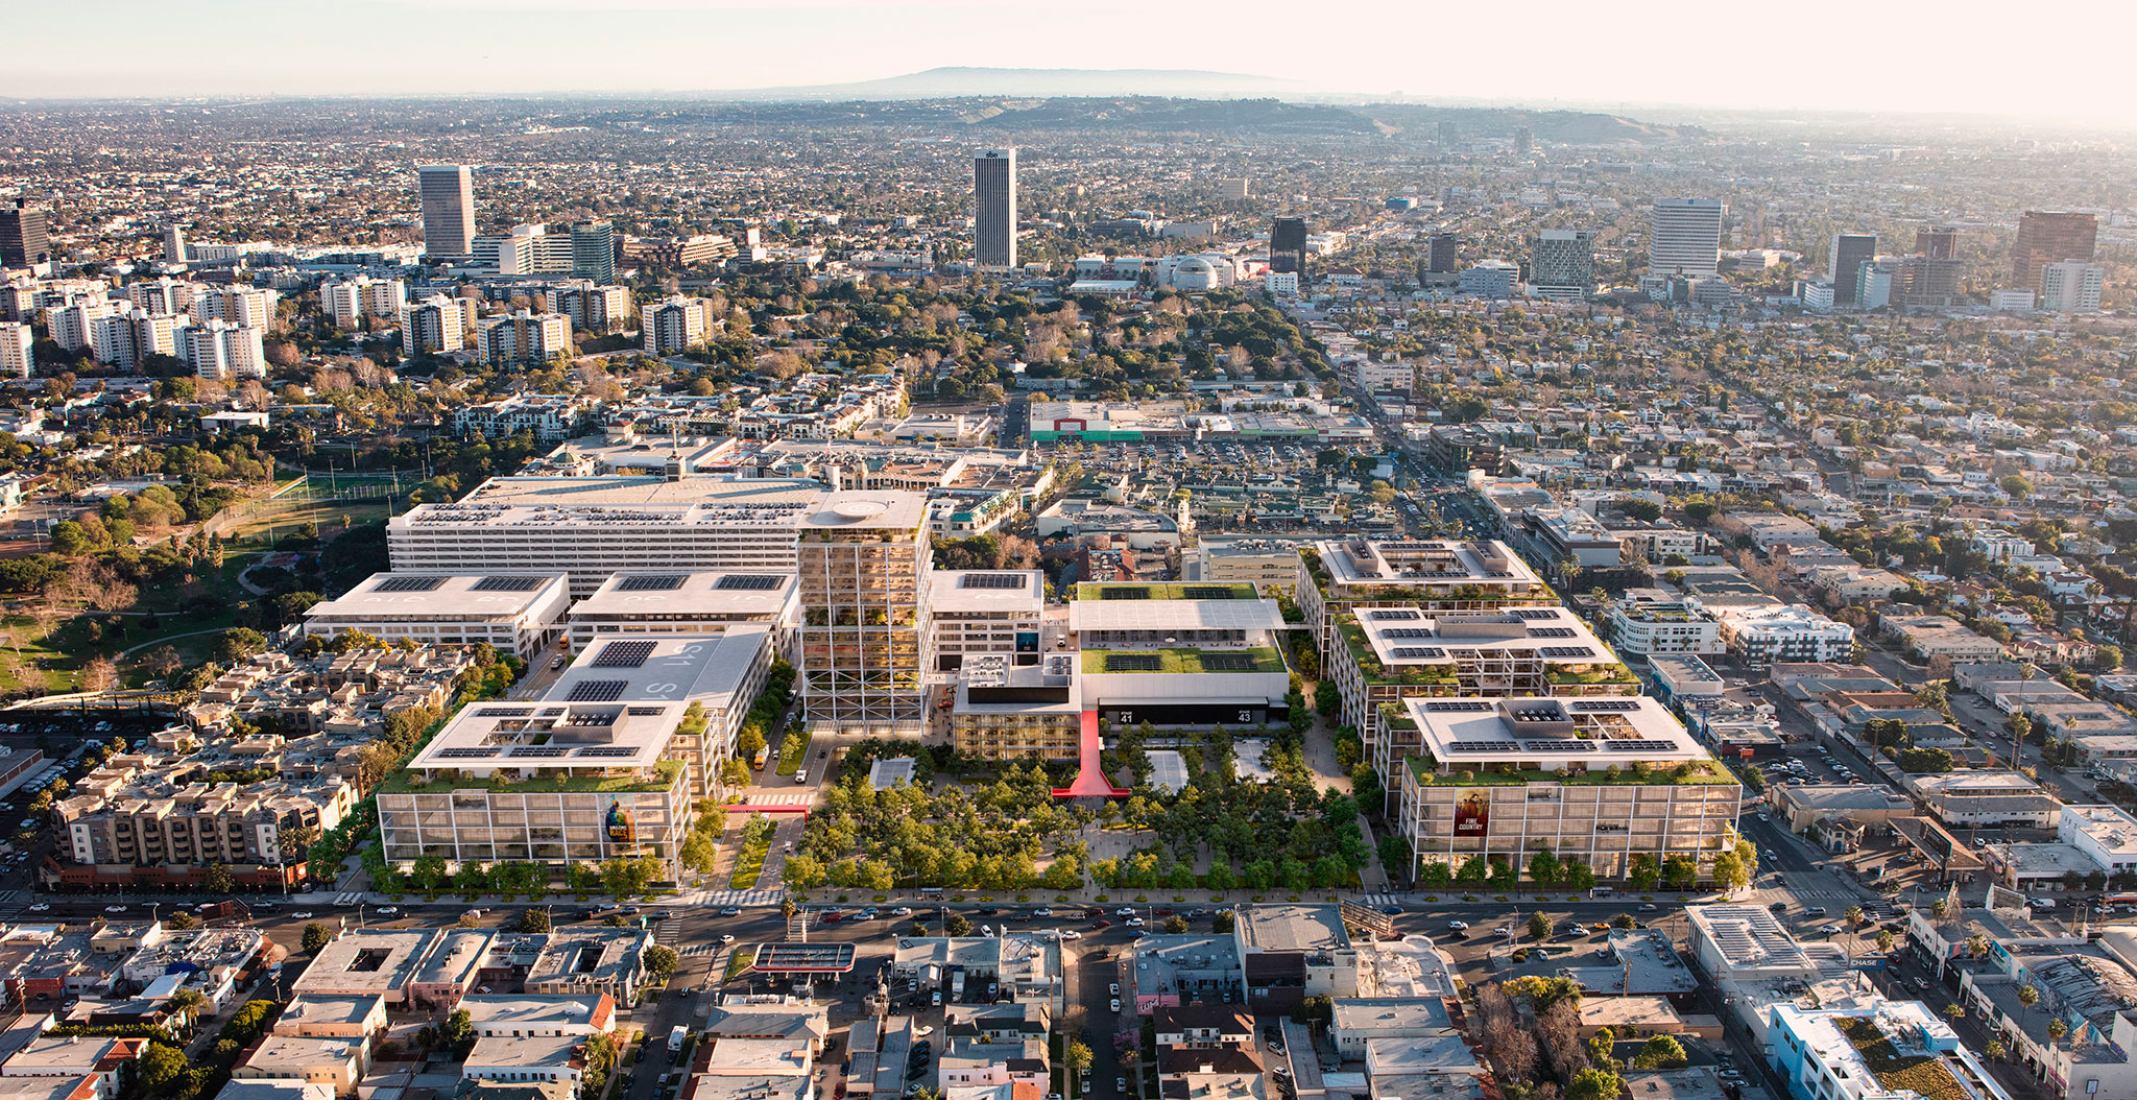 Rendering. Television City 2050 by Foster + Partners.